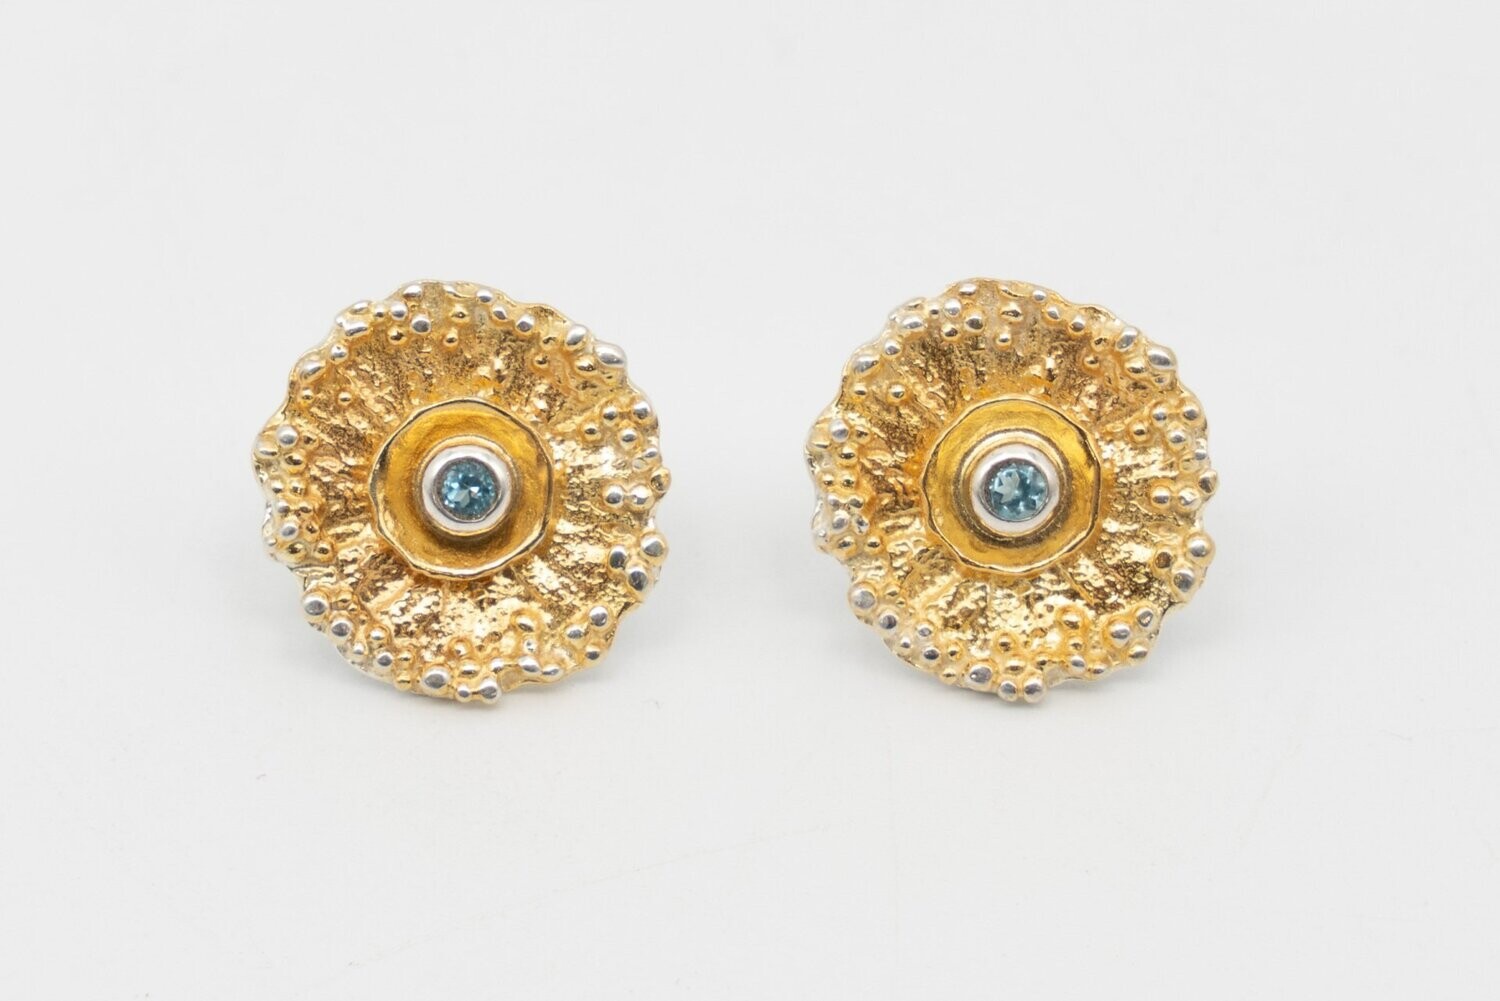 Contemporary Gold & Topaz Earrings